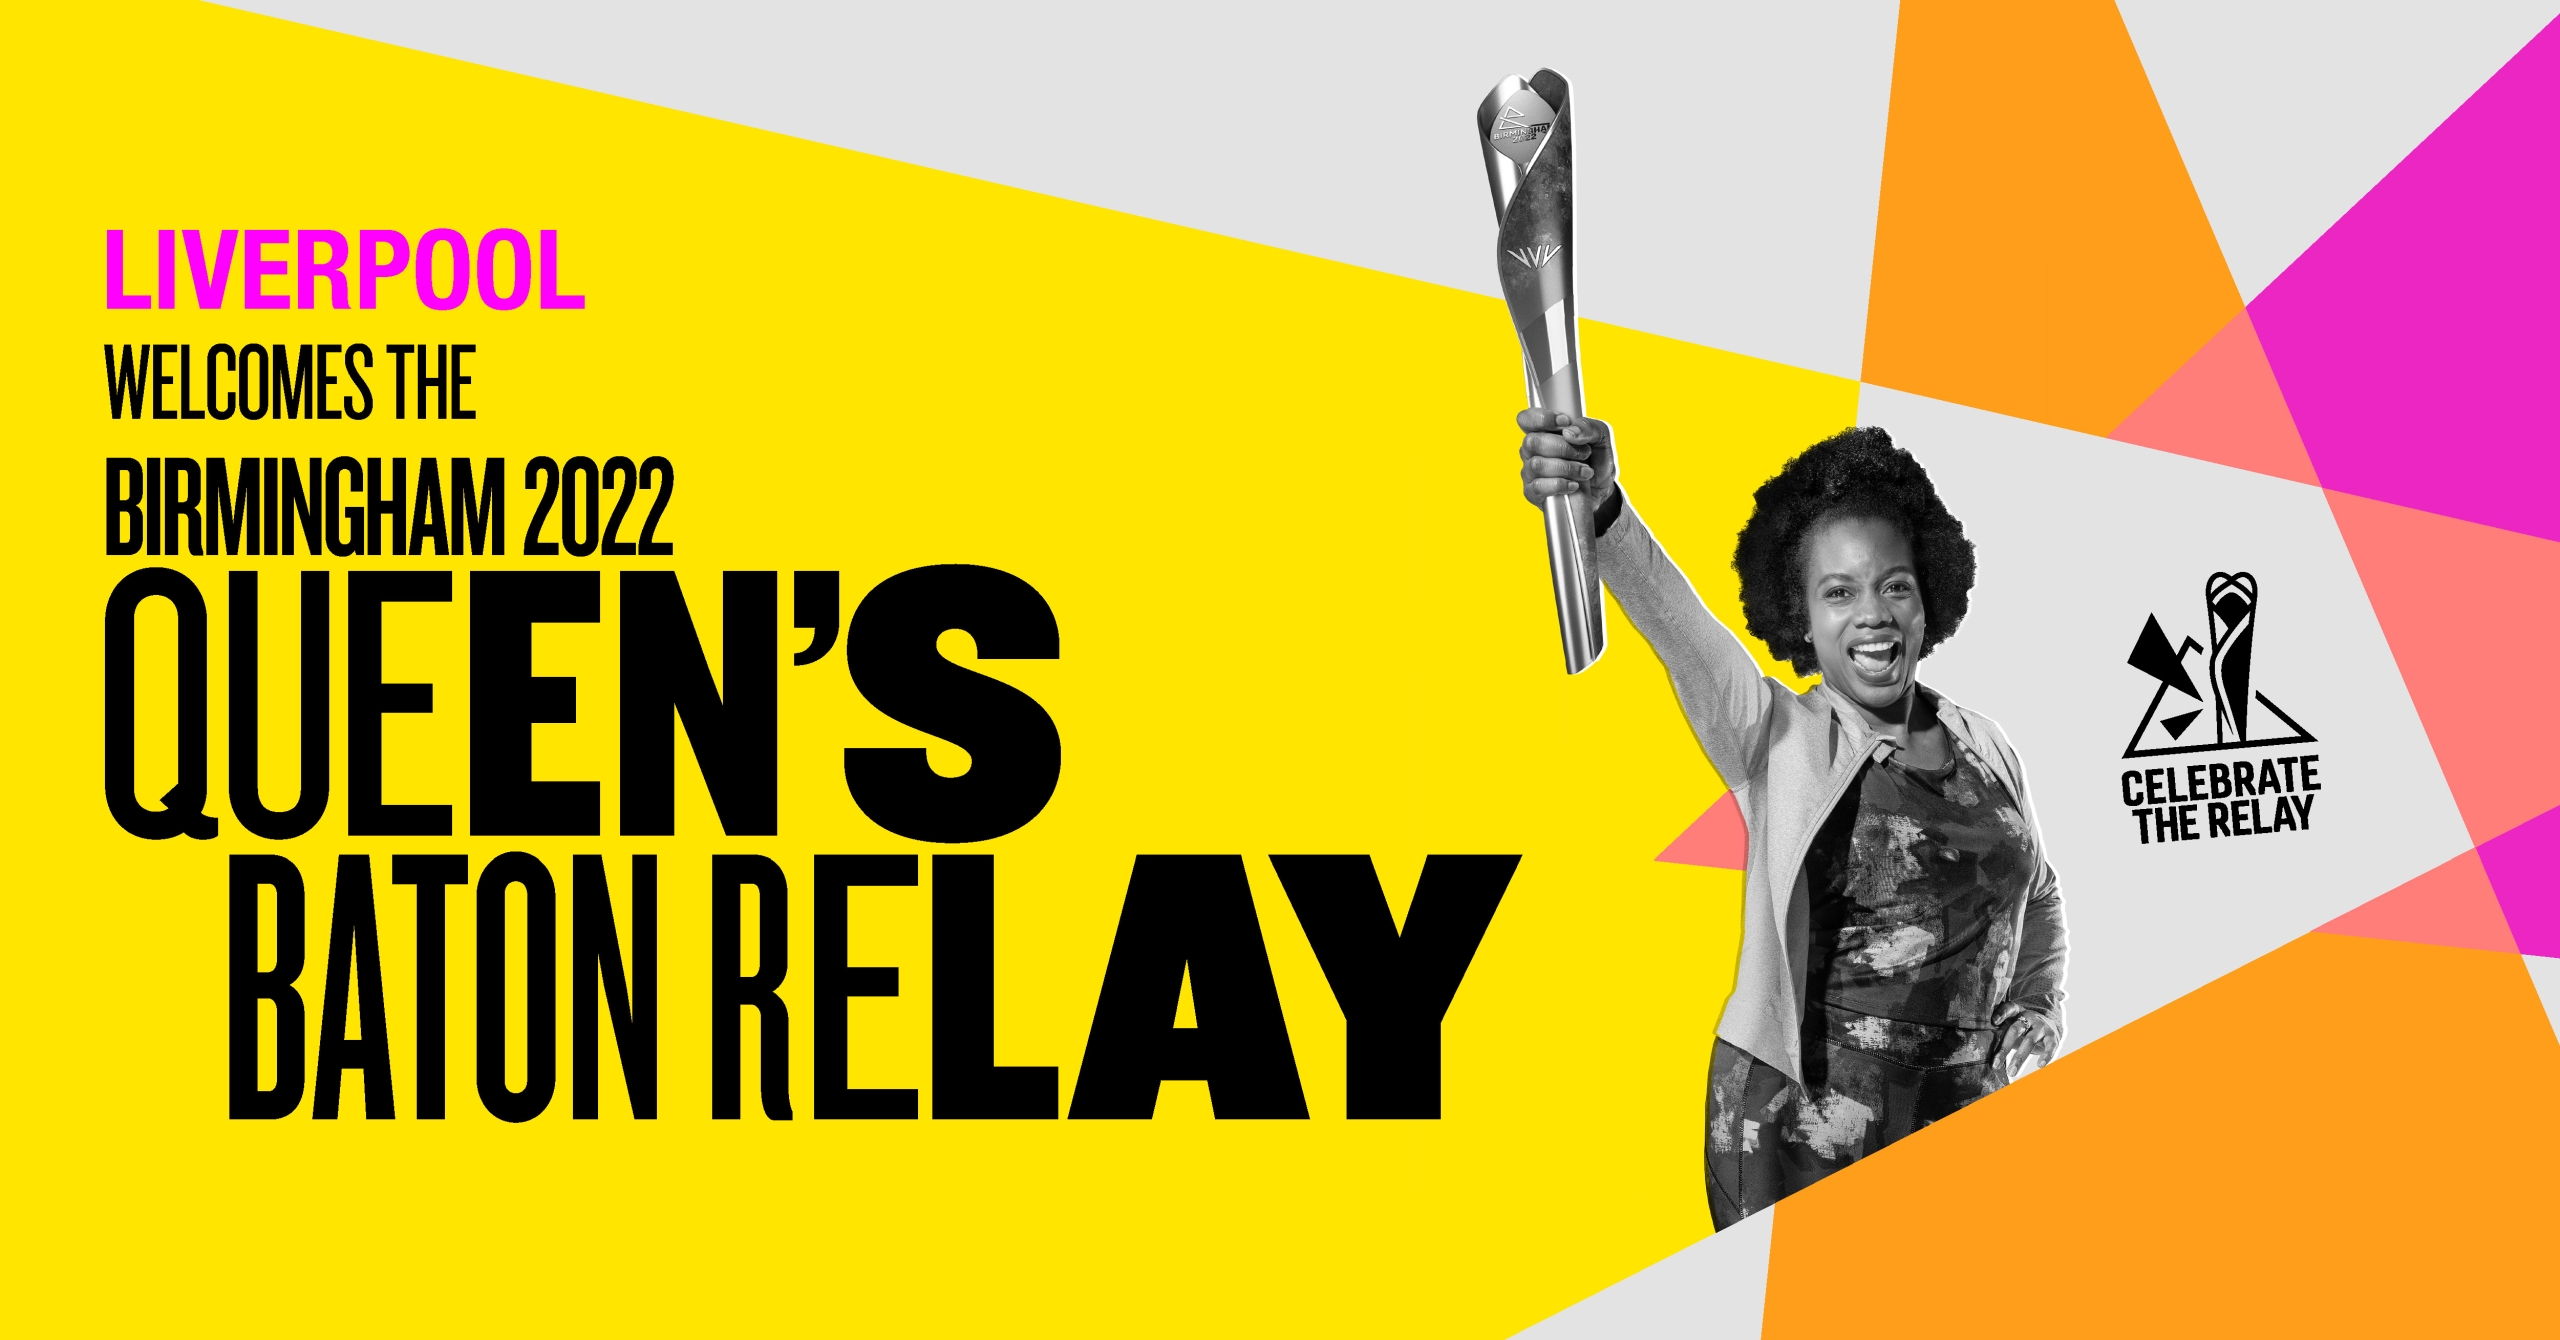 queens baton relay text over a yellow band with a black lady holding a baton in the air